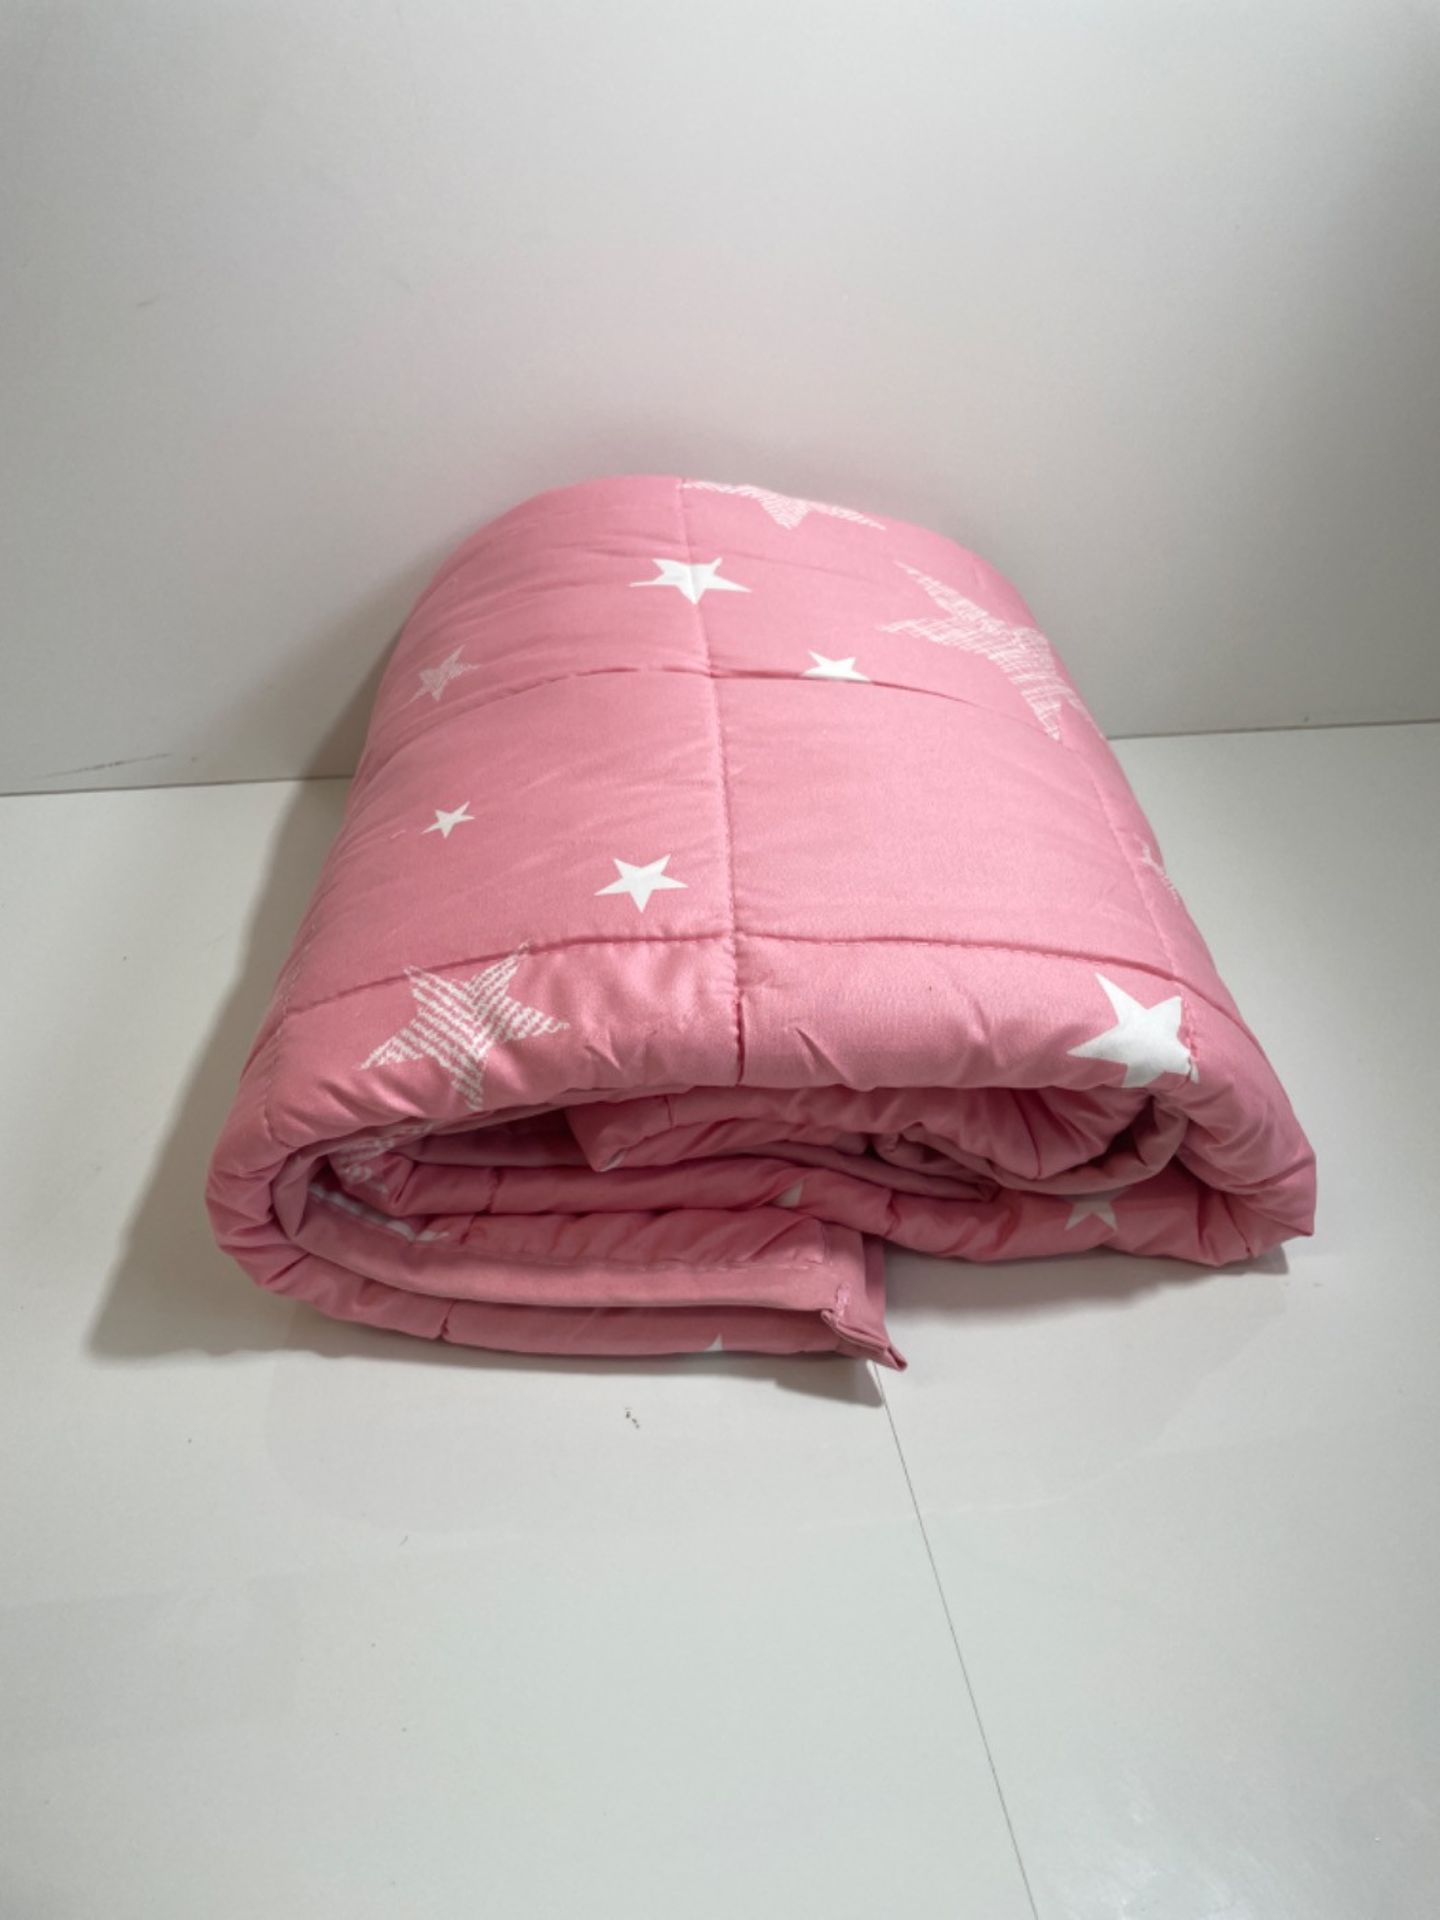 Dreamscene Star Weighted Blanket for Kids Children Sleep Insomnia Therapy Anxiety Relief Autism Rev - Image 3 of 3